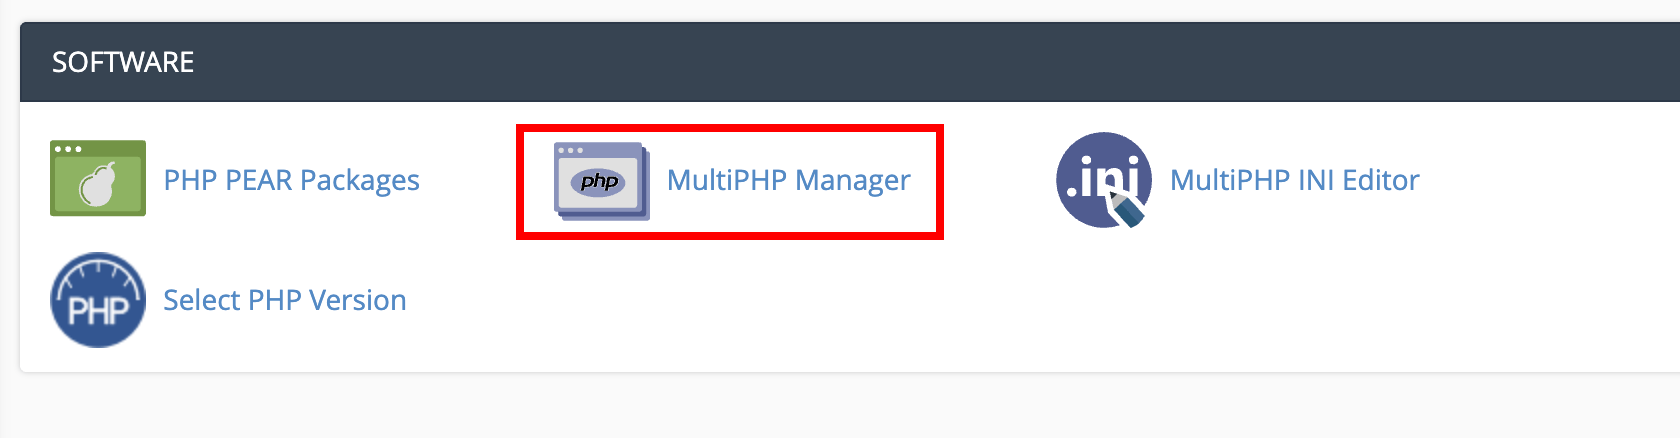 MultiPHP button in cPanel